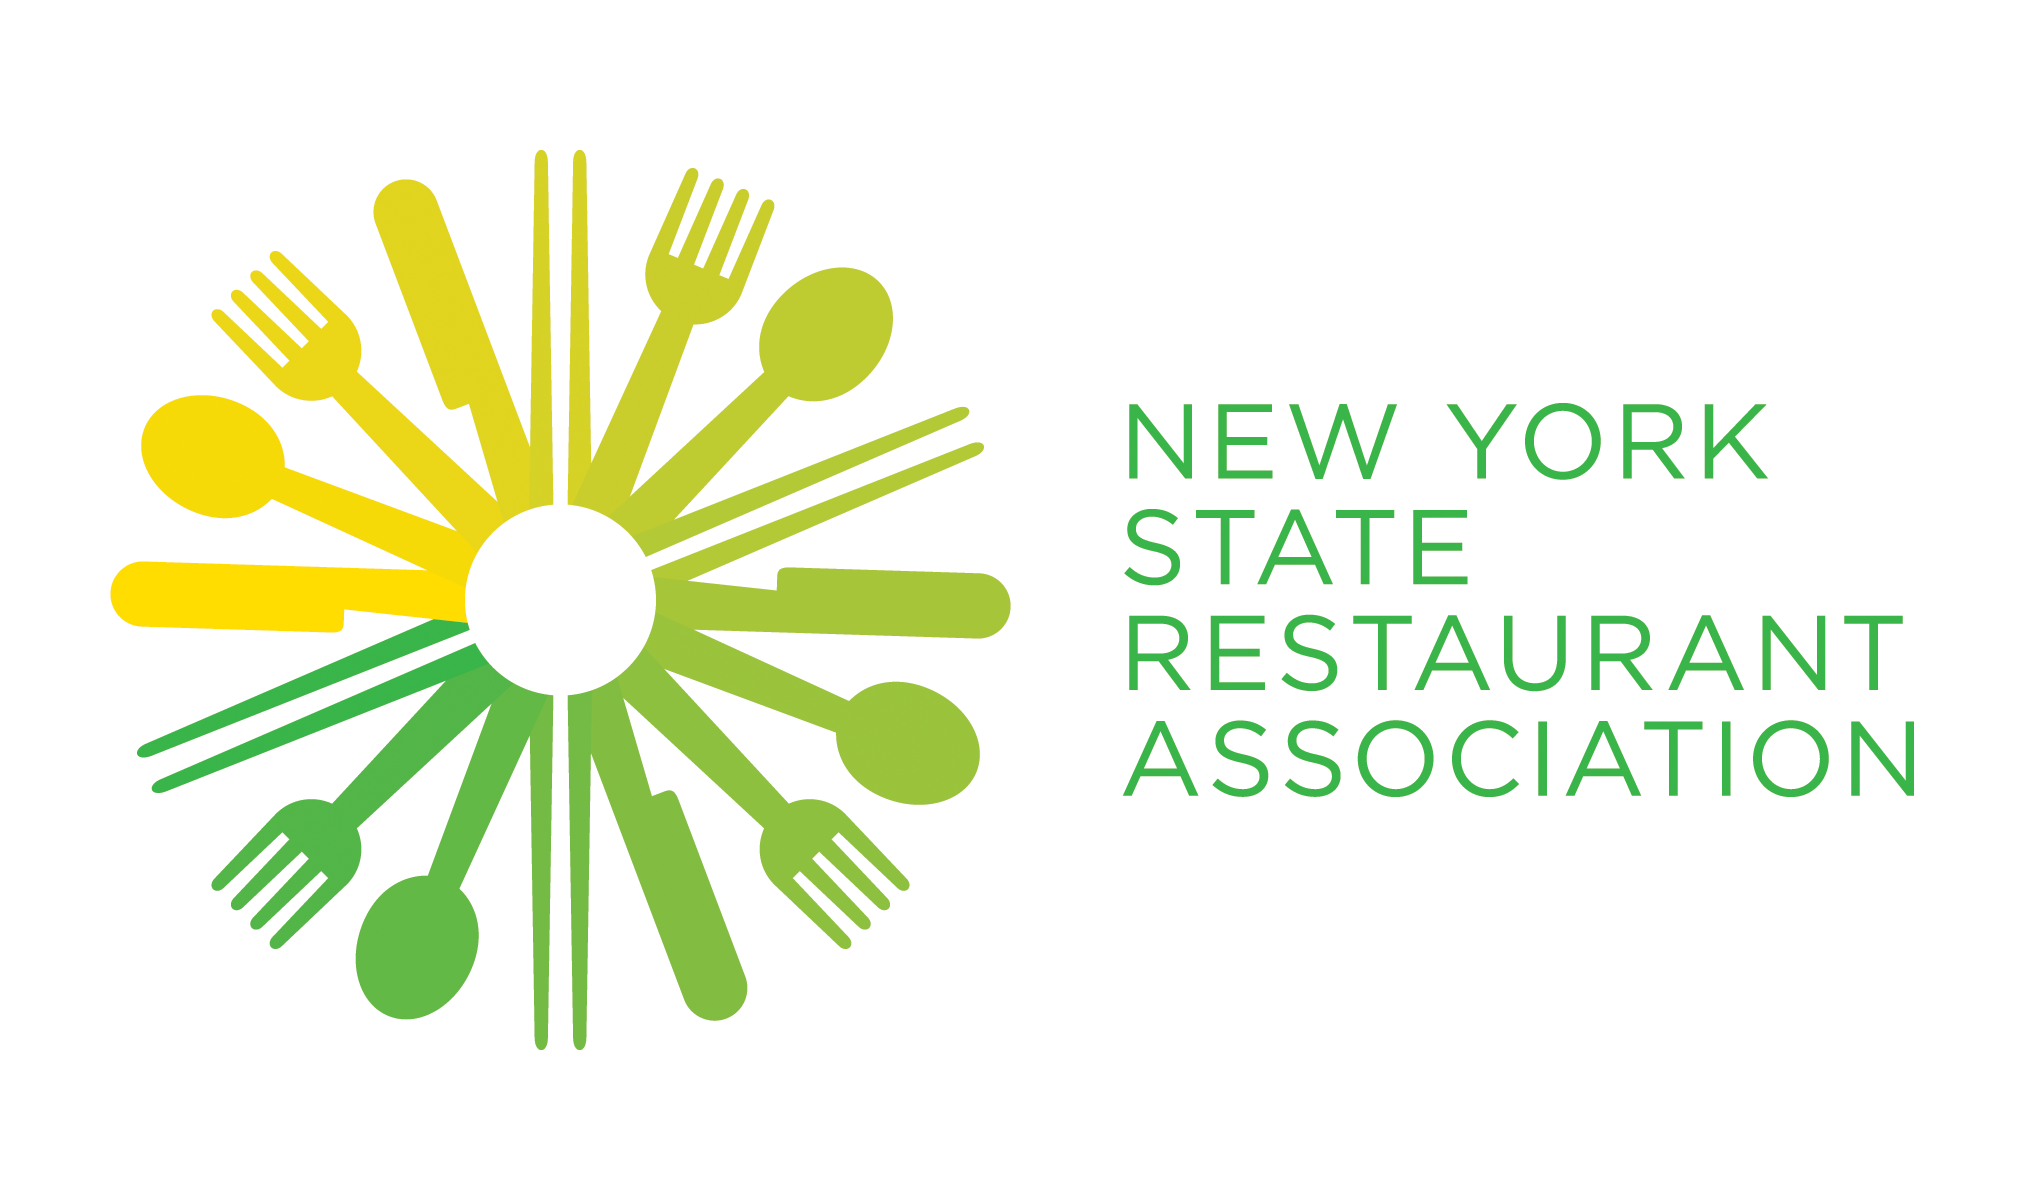 Project image 1 for NYSRA Identity, New York State Restaurant Association